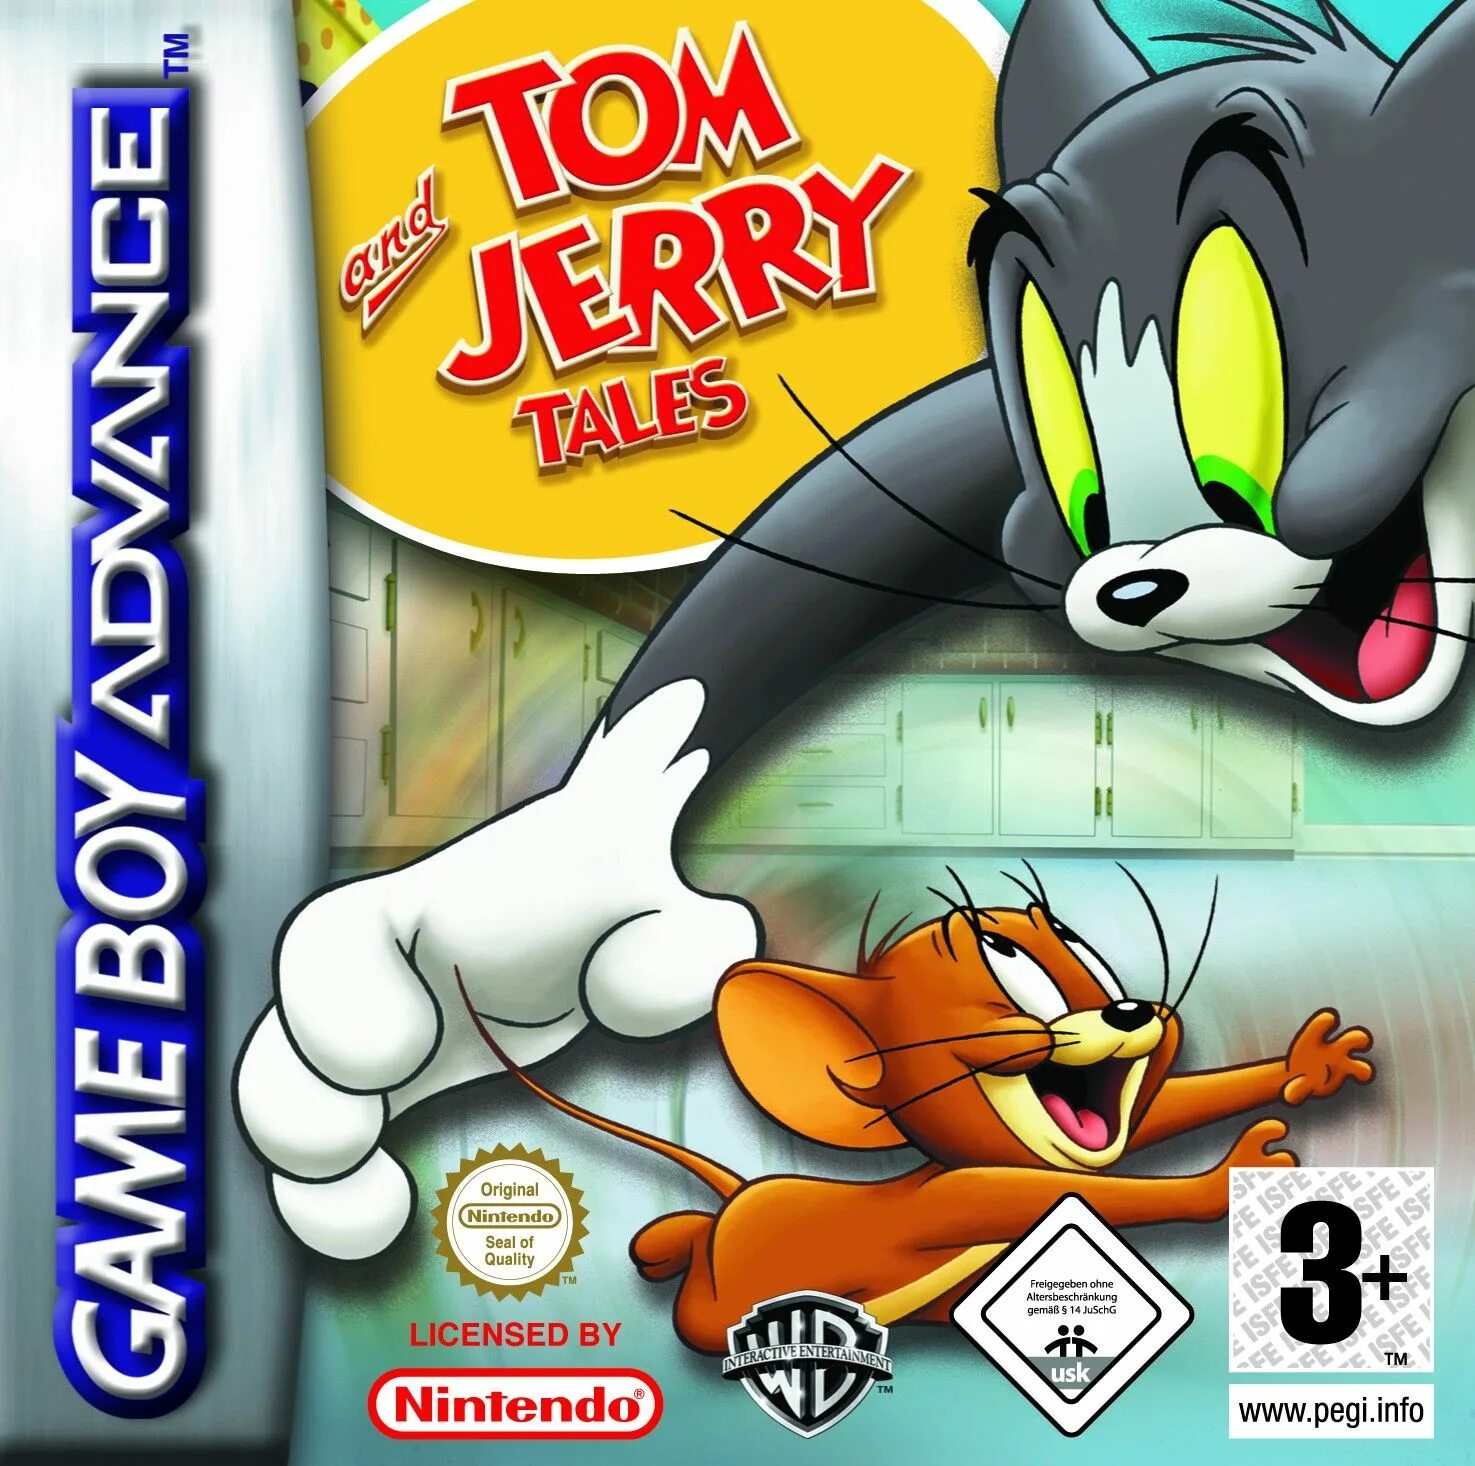 Toms tales. Tom and Jerry Tales GBA. Tom and Jerry Tales game boy. Tom and Jerry ps1. Игра том и Джерри на PS.